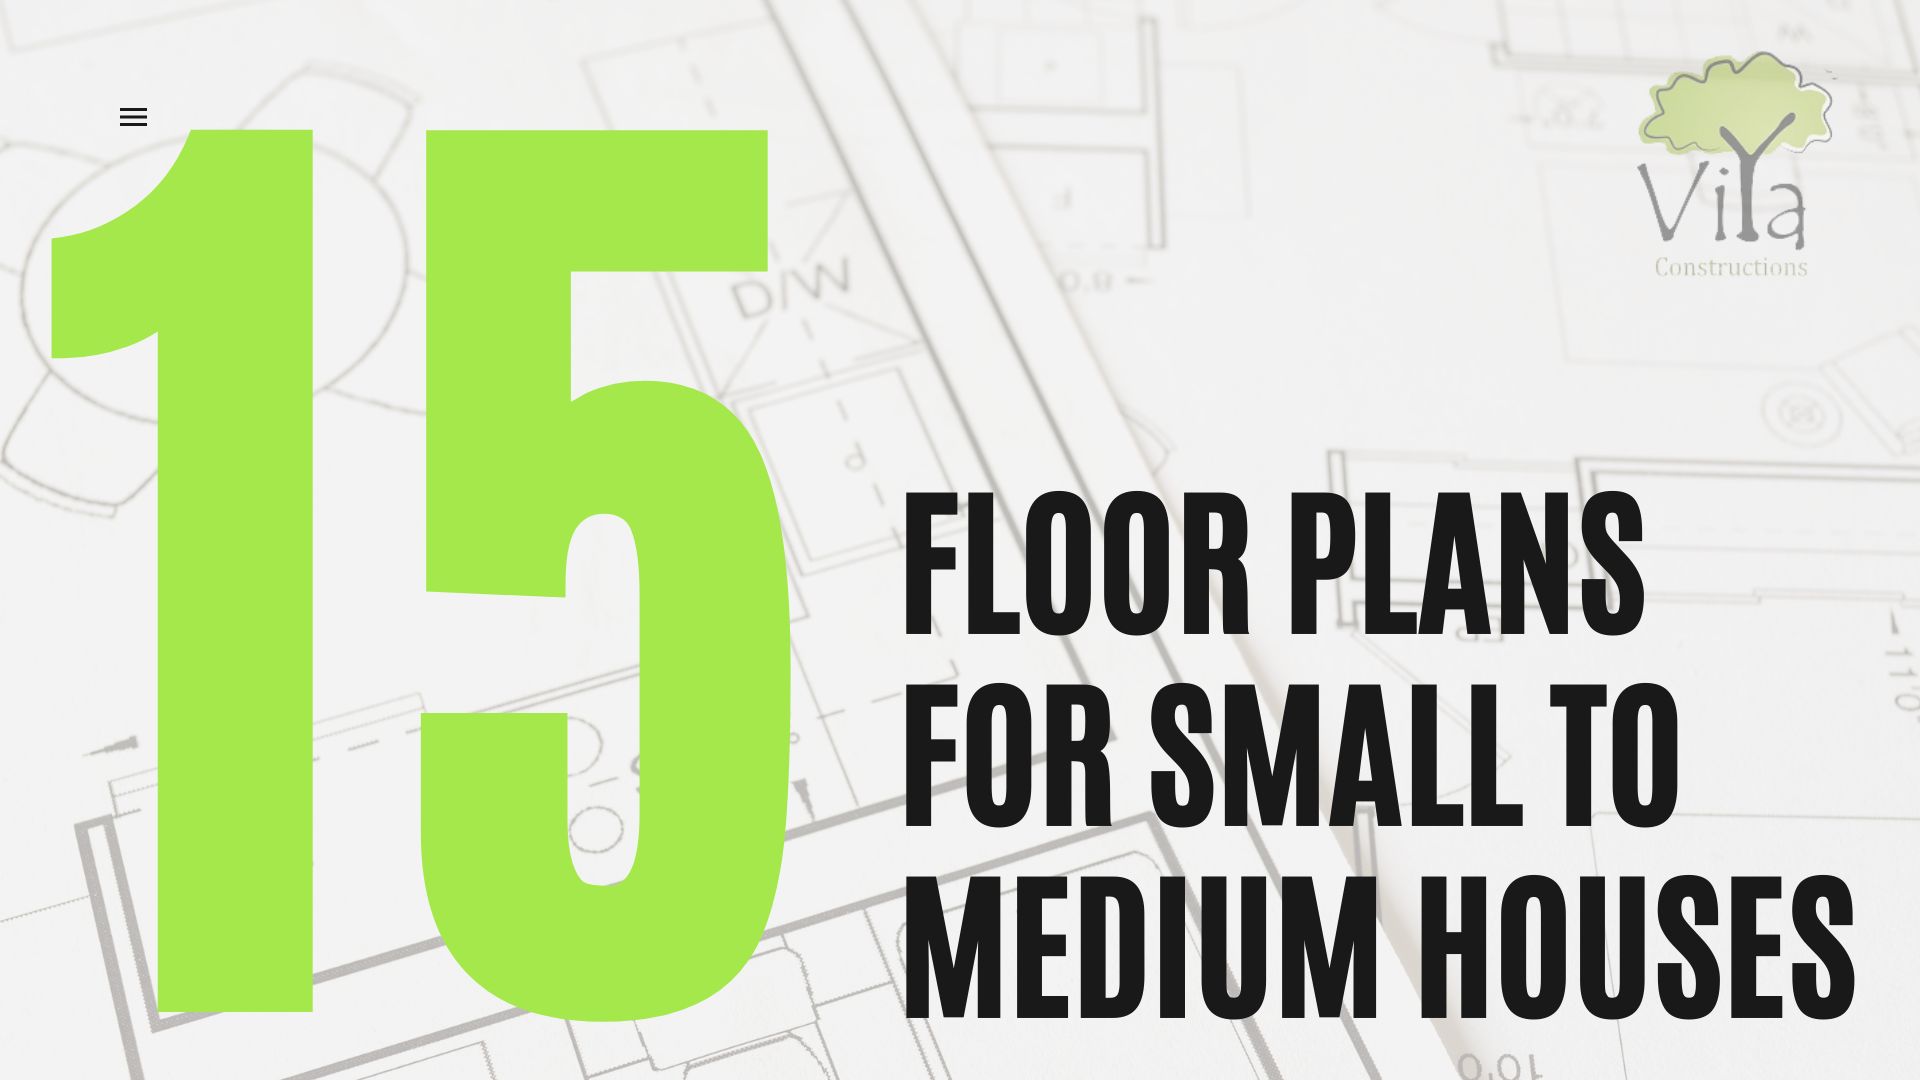 Floor plans for small to medium houses